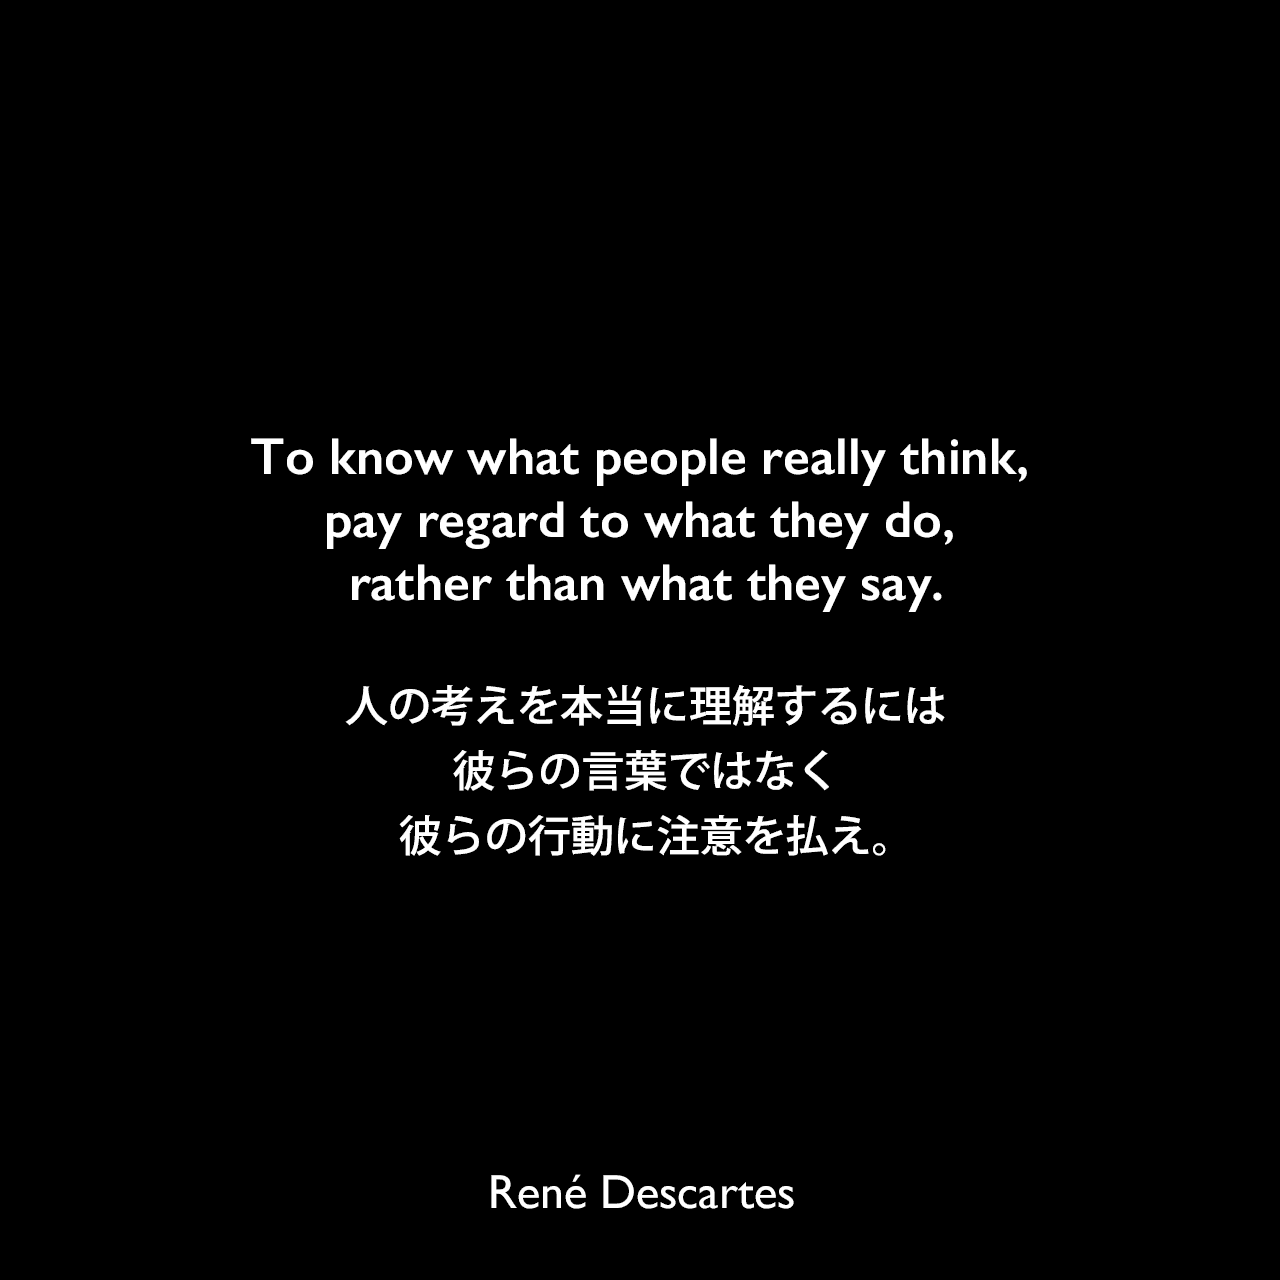 To know what people really think, pay regard to what they do, rather than what they say.人の考えを本当に理解するには、彼らの言葉ではなく、彼らの行動に注意を払え。